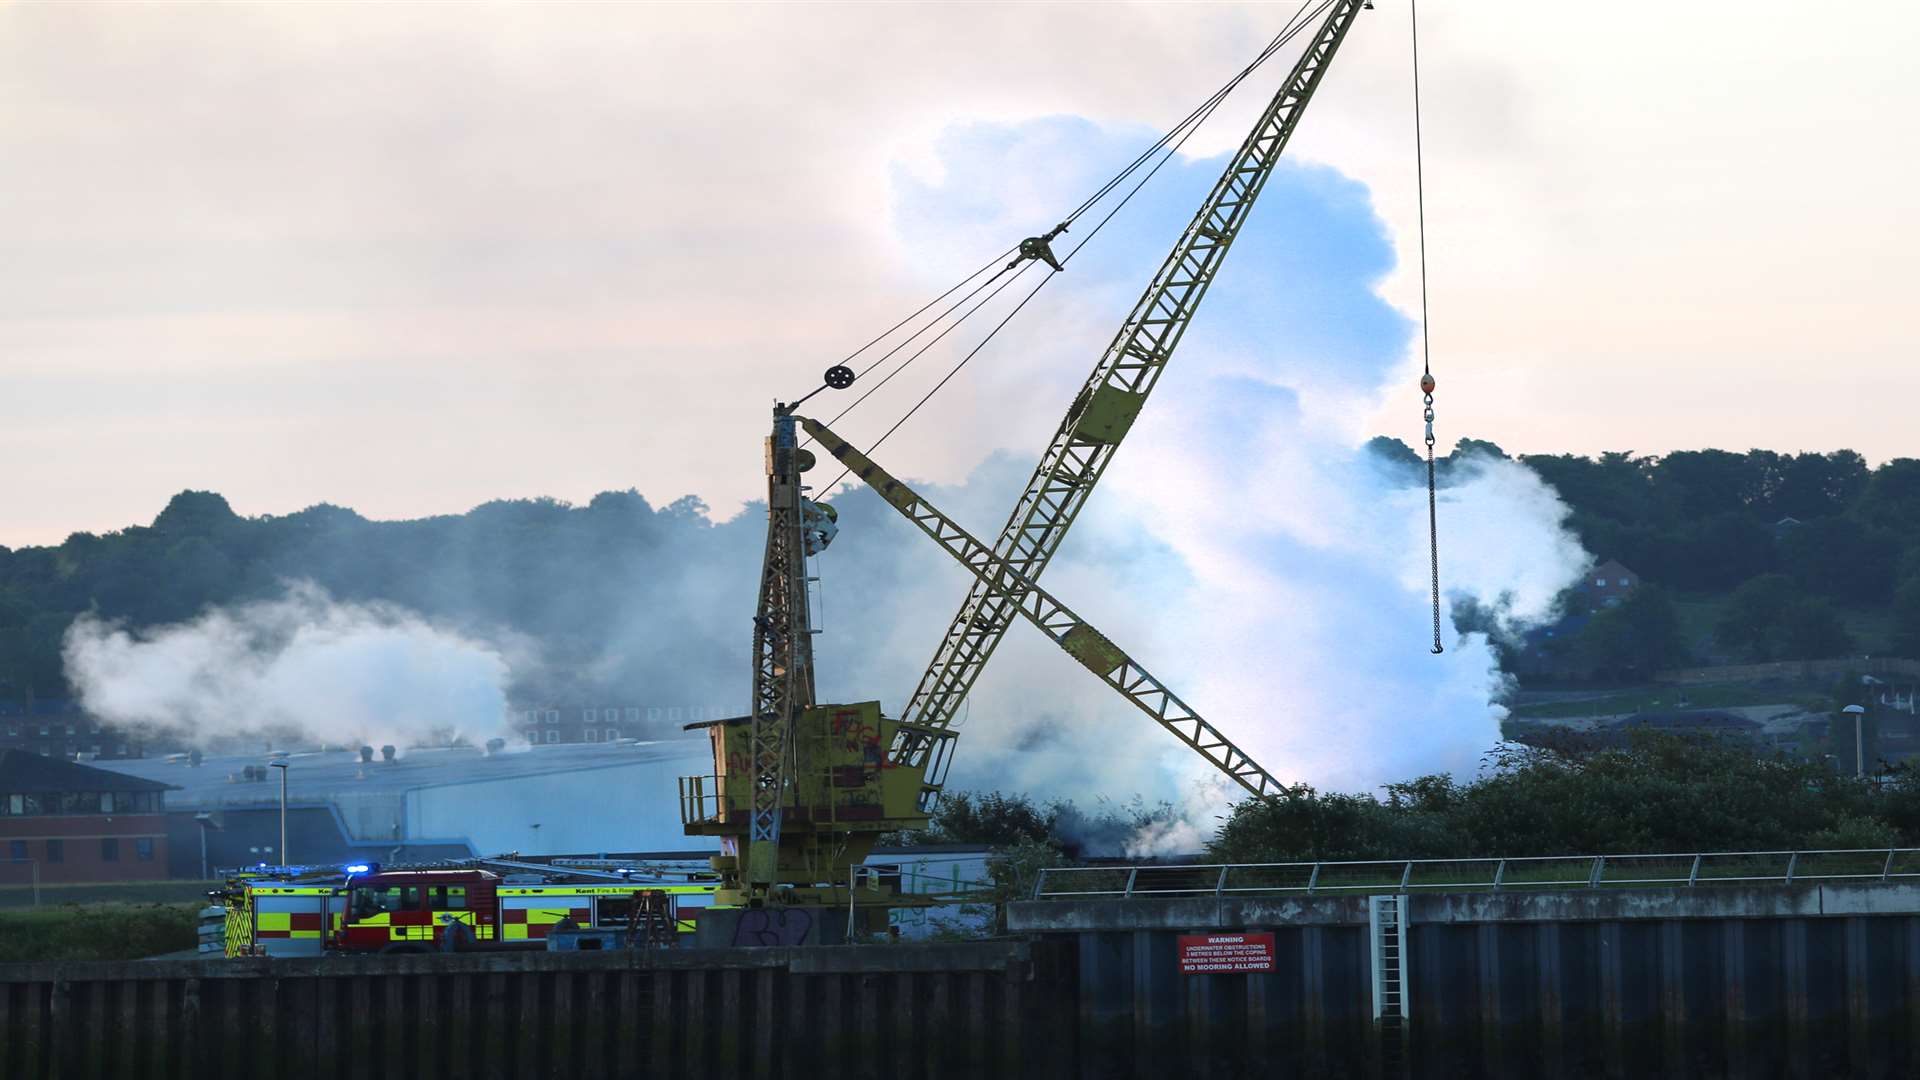 Firefighters were called to Acorn Shipyard at around 5am this morning. Pic: Keith Thompson